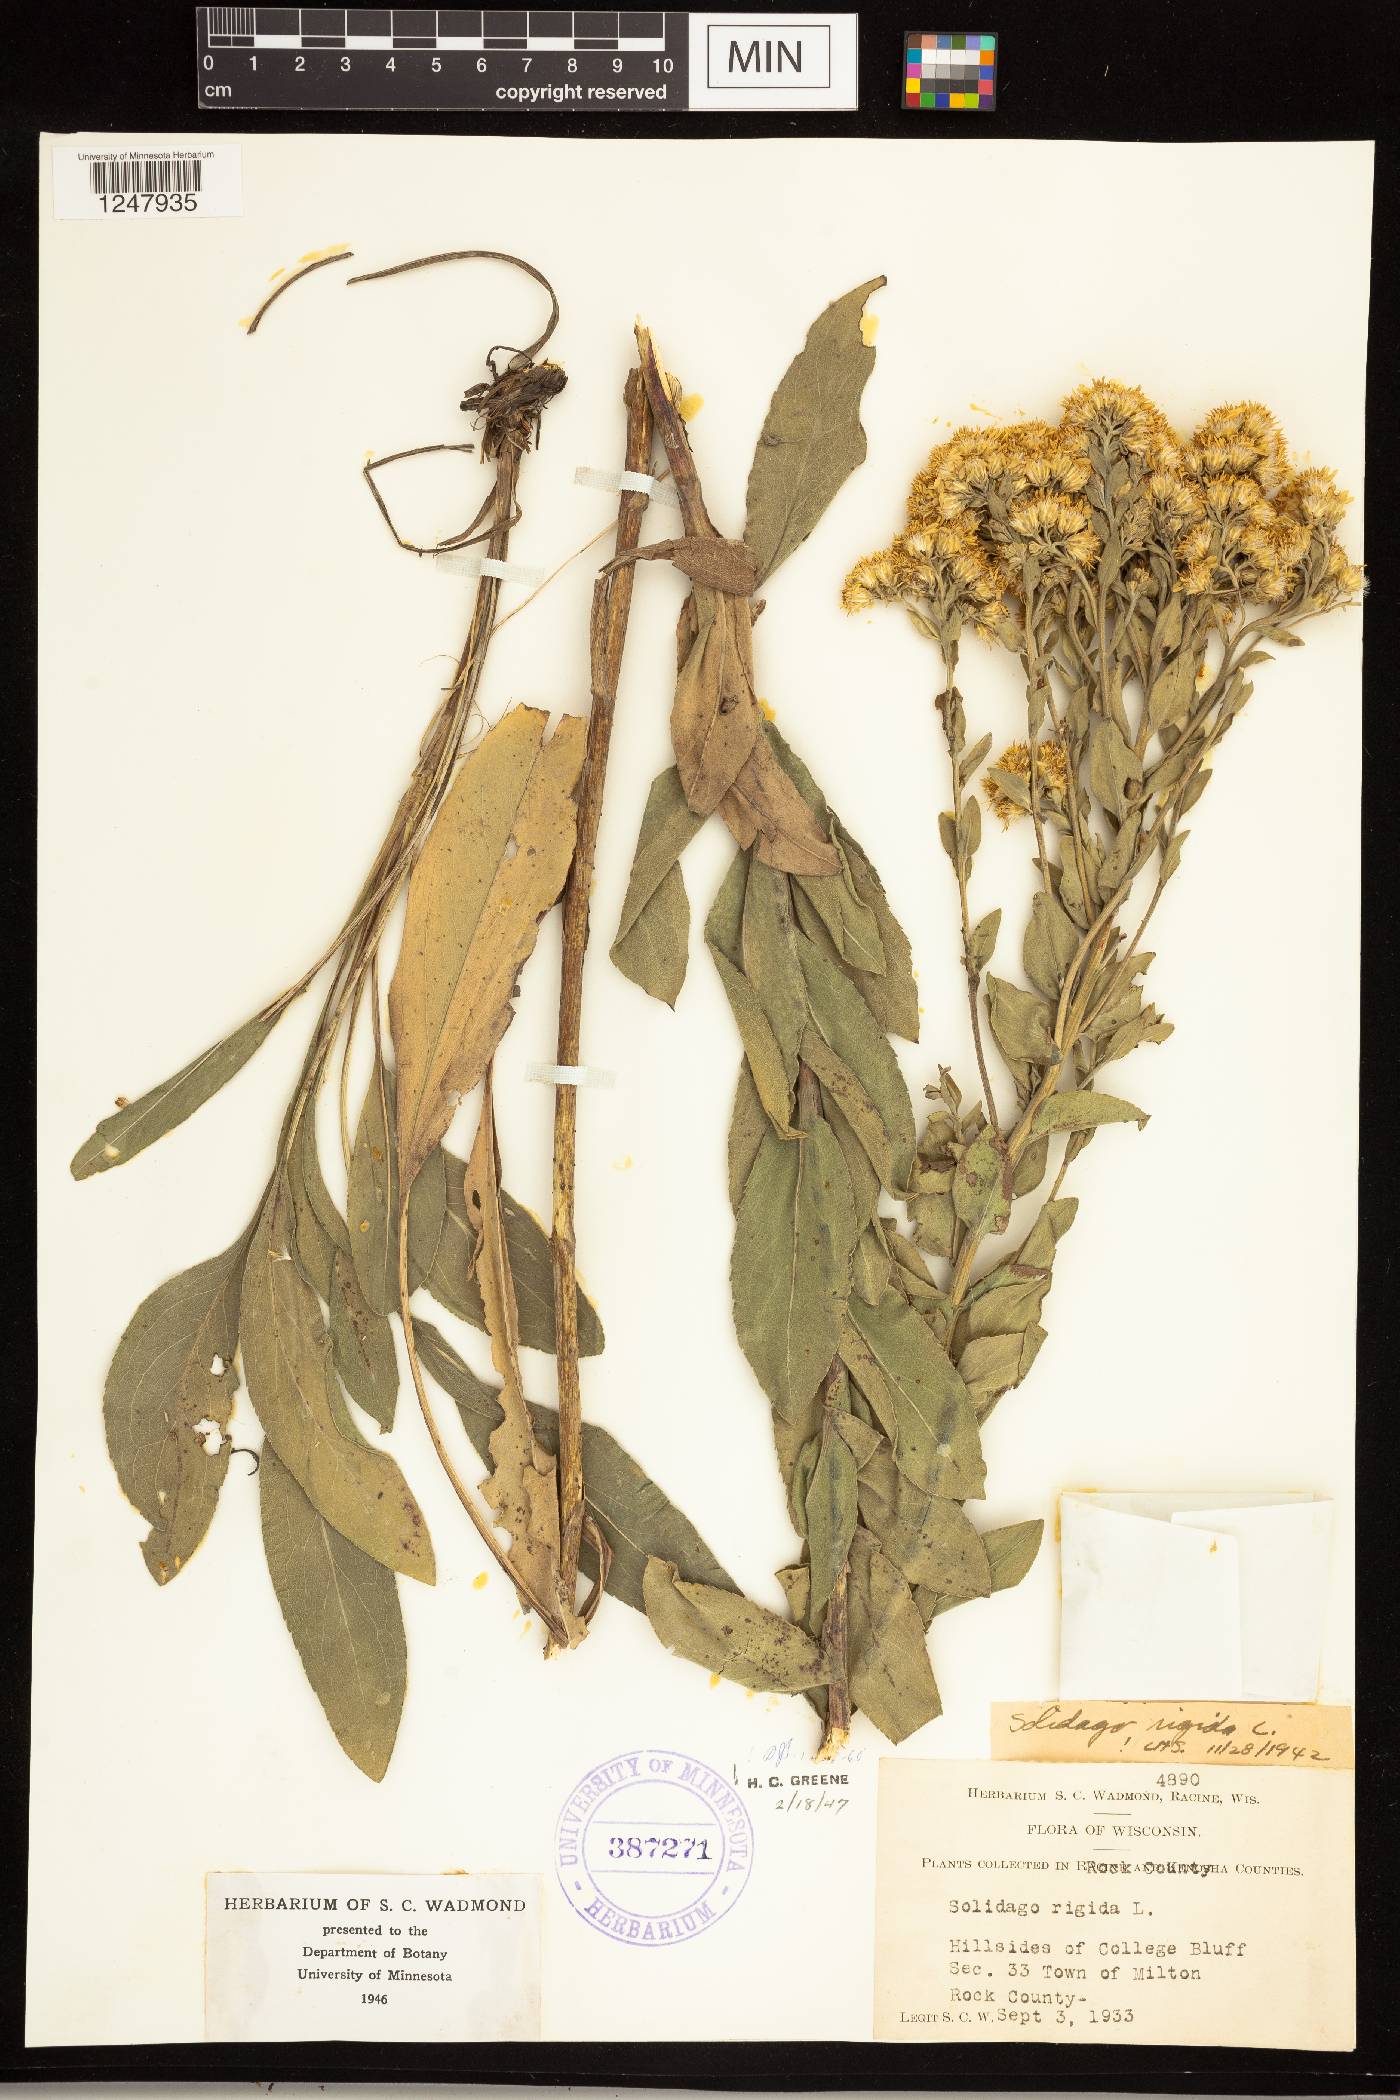 Stiff Goldenrod specimen from the town of Milton, Wisconsin dated September 3, 1933.